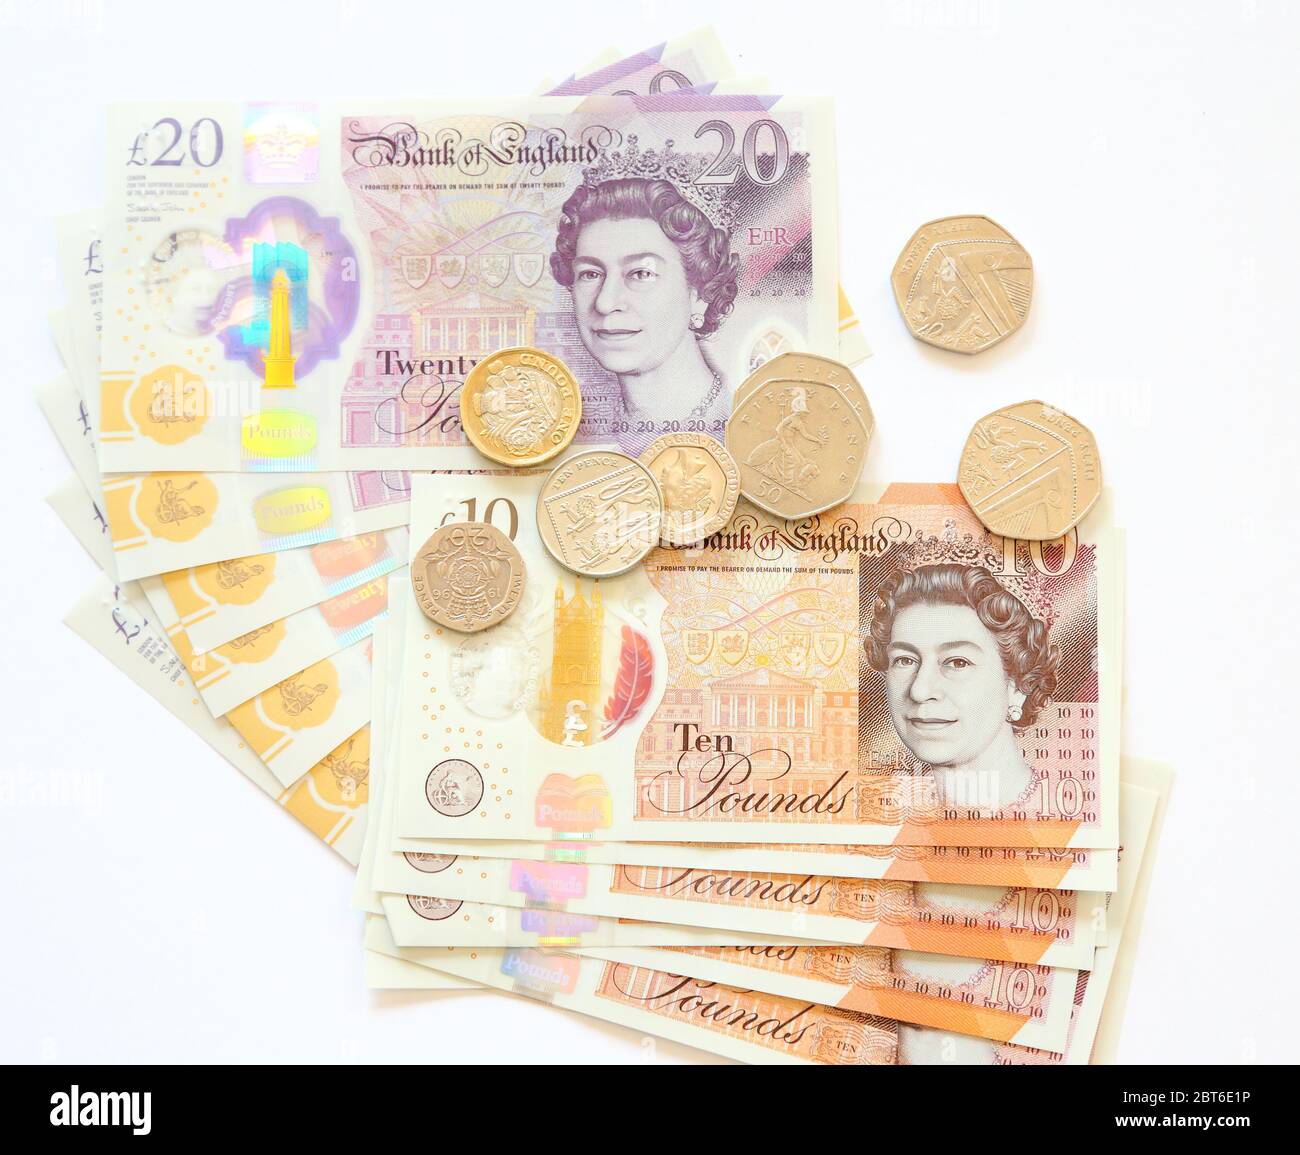 Ten 10 and Twenty 20 British pound notes and coins on white background Stock Photo